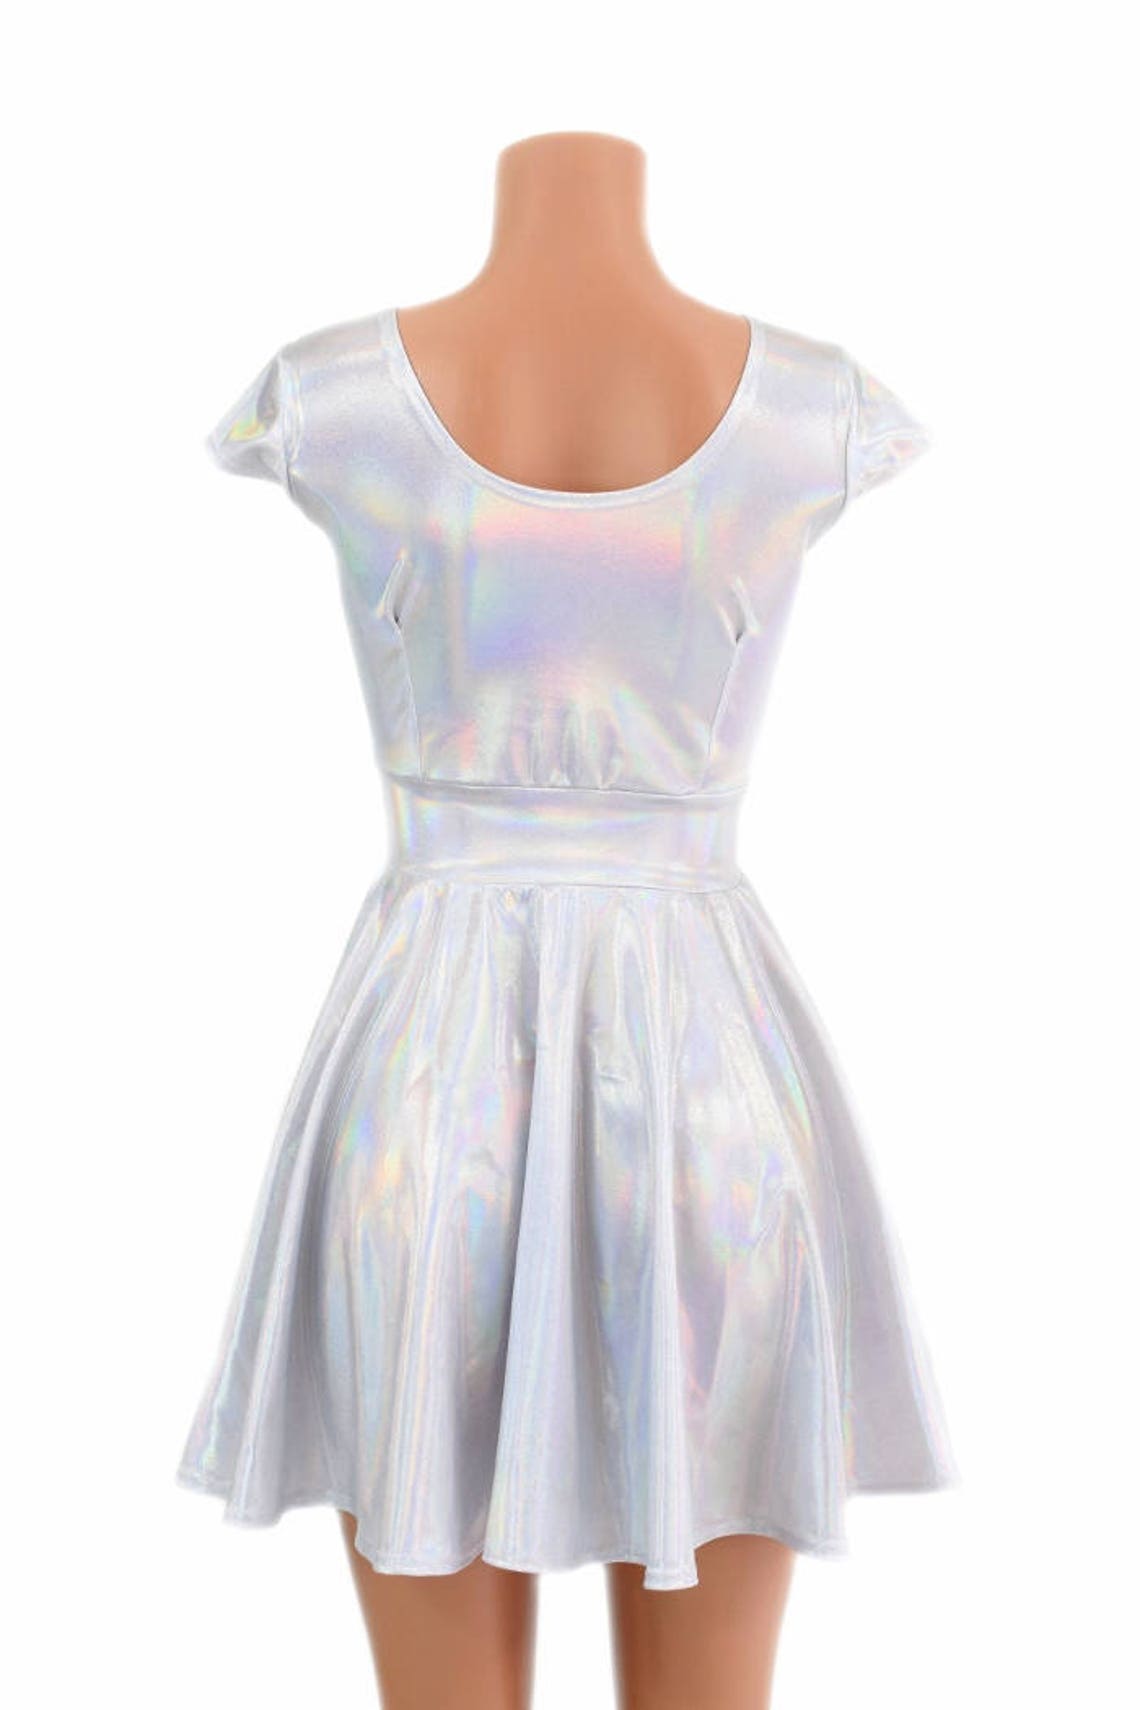 Flashbulb Holographic Cap Sleeve Skater Dress With Scoop | Etsy